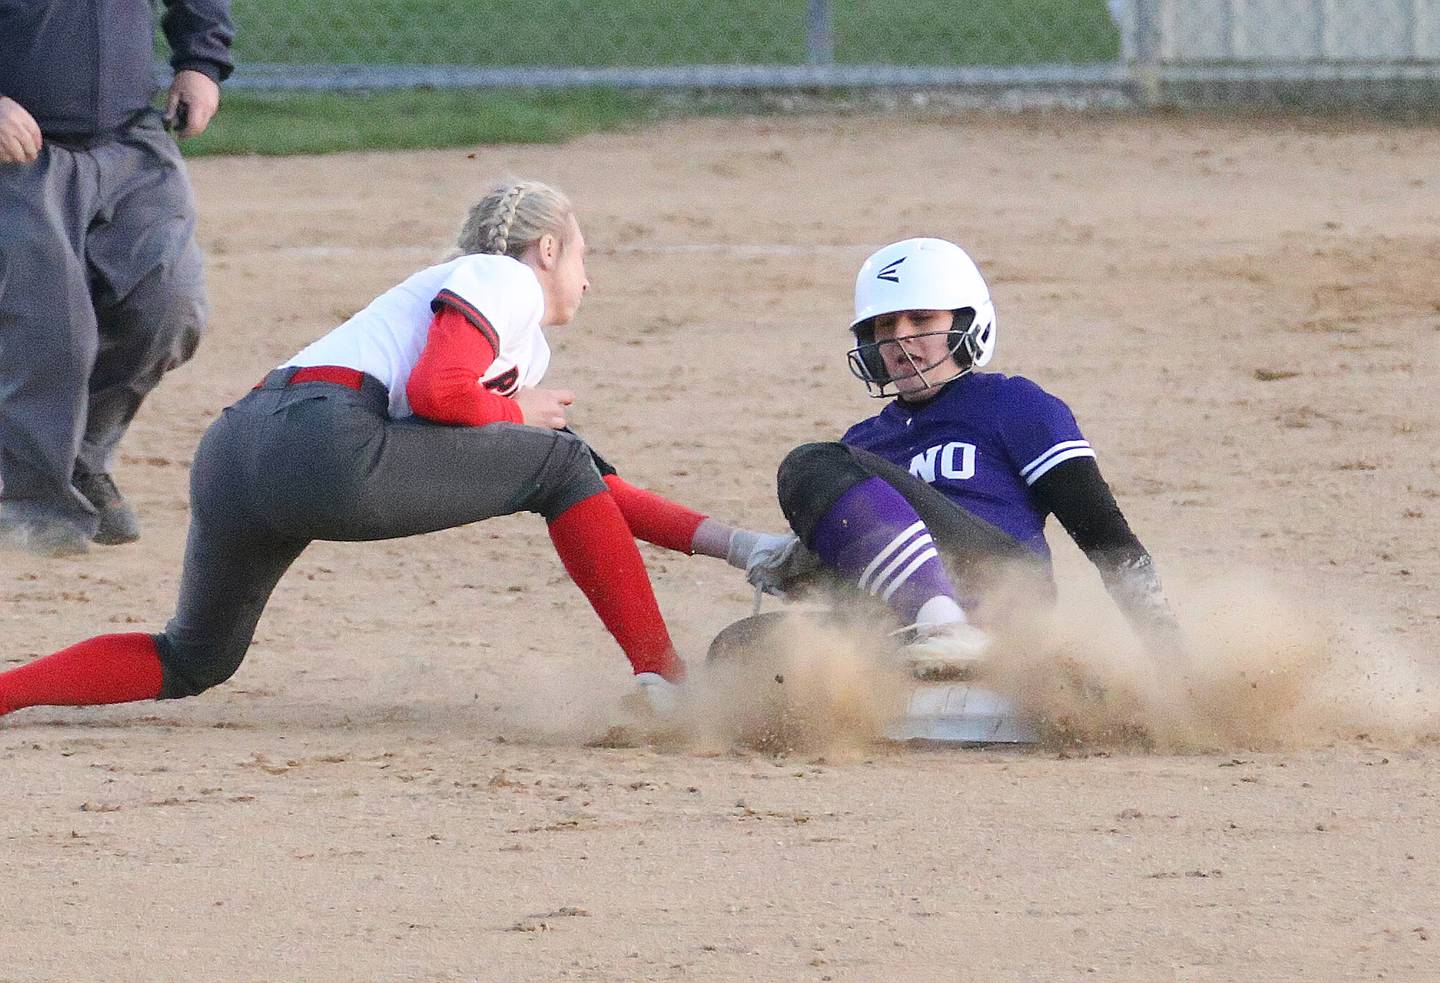 Ottawa's Ryleigh Stehl misses a tag on Plano's while stealing second base on Thursday, April 6, 2023 at King Field in Ottawa.